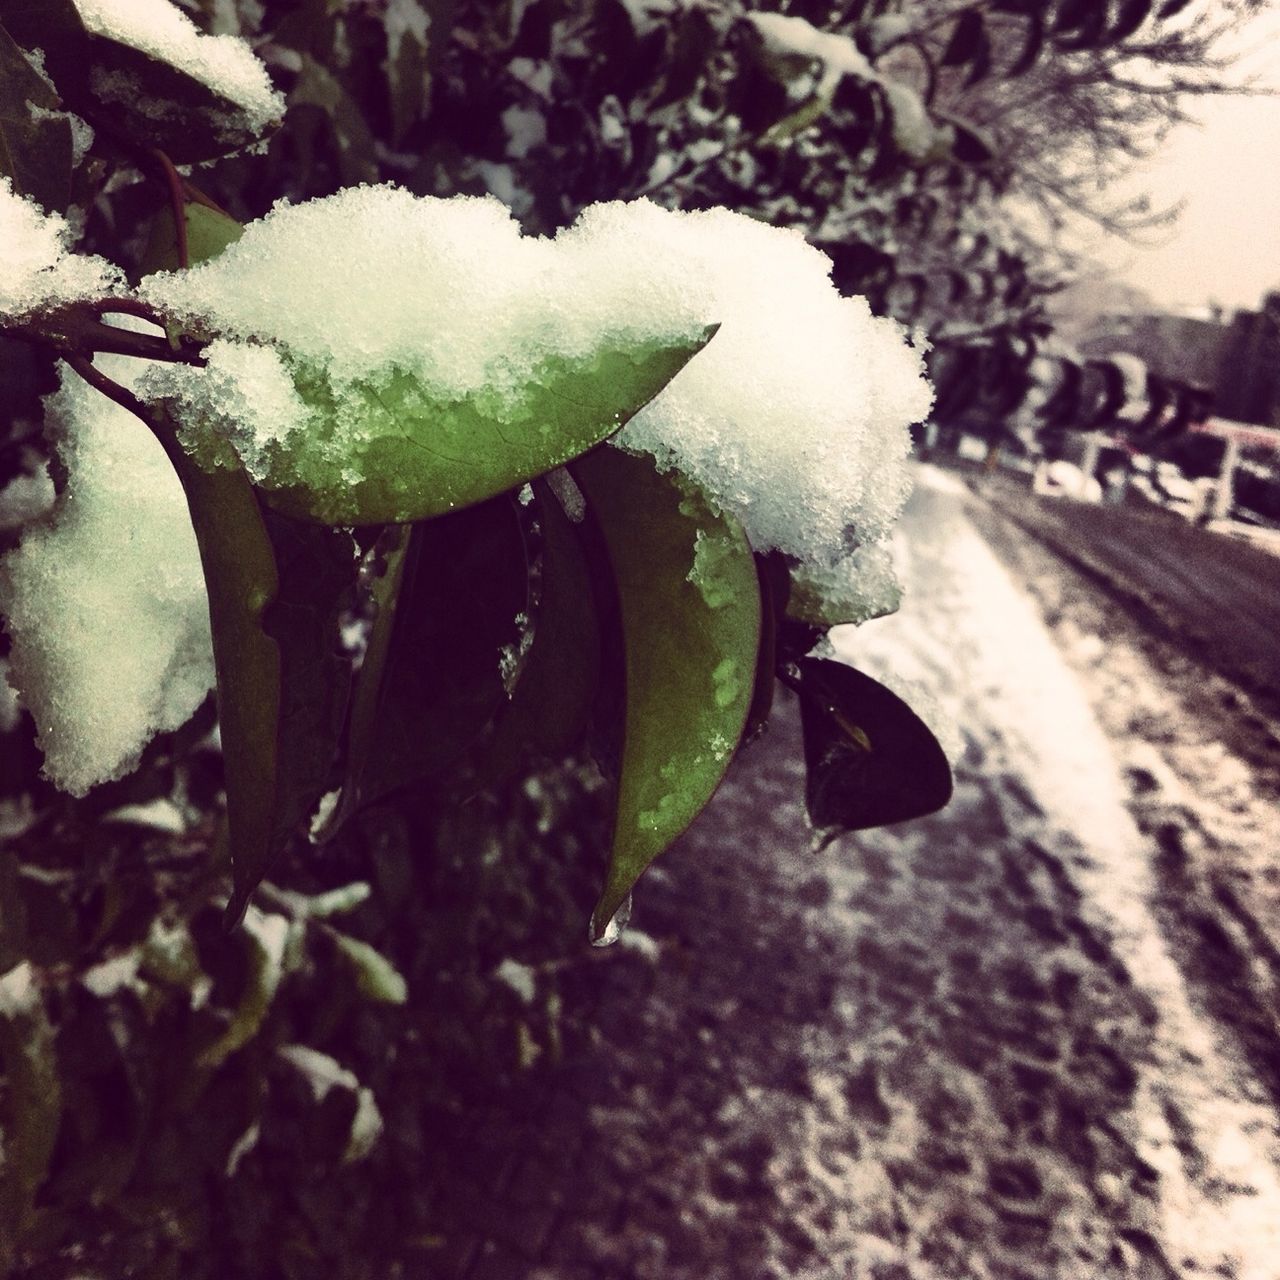 growth, leaf, season, plant, nature, weather, fragility, flower, street, wet, winter, close-up, cold temperature, snow, white color, road, day, freshness, beauty in nature, focus on foreground